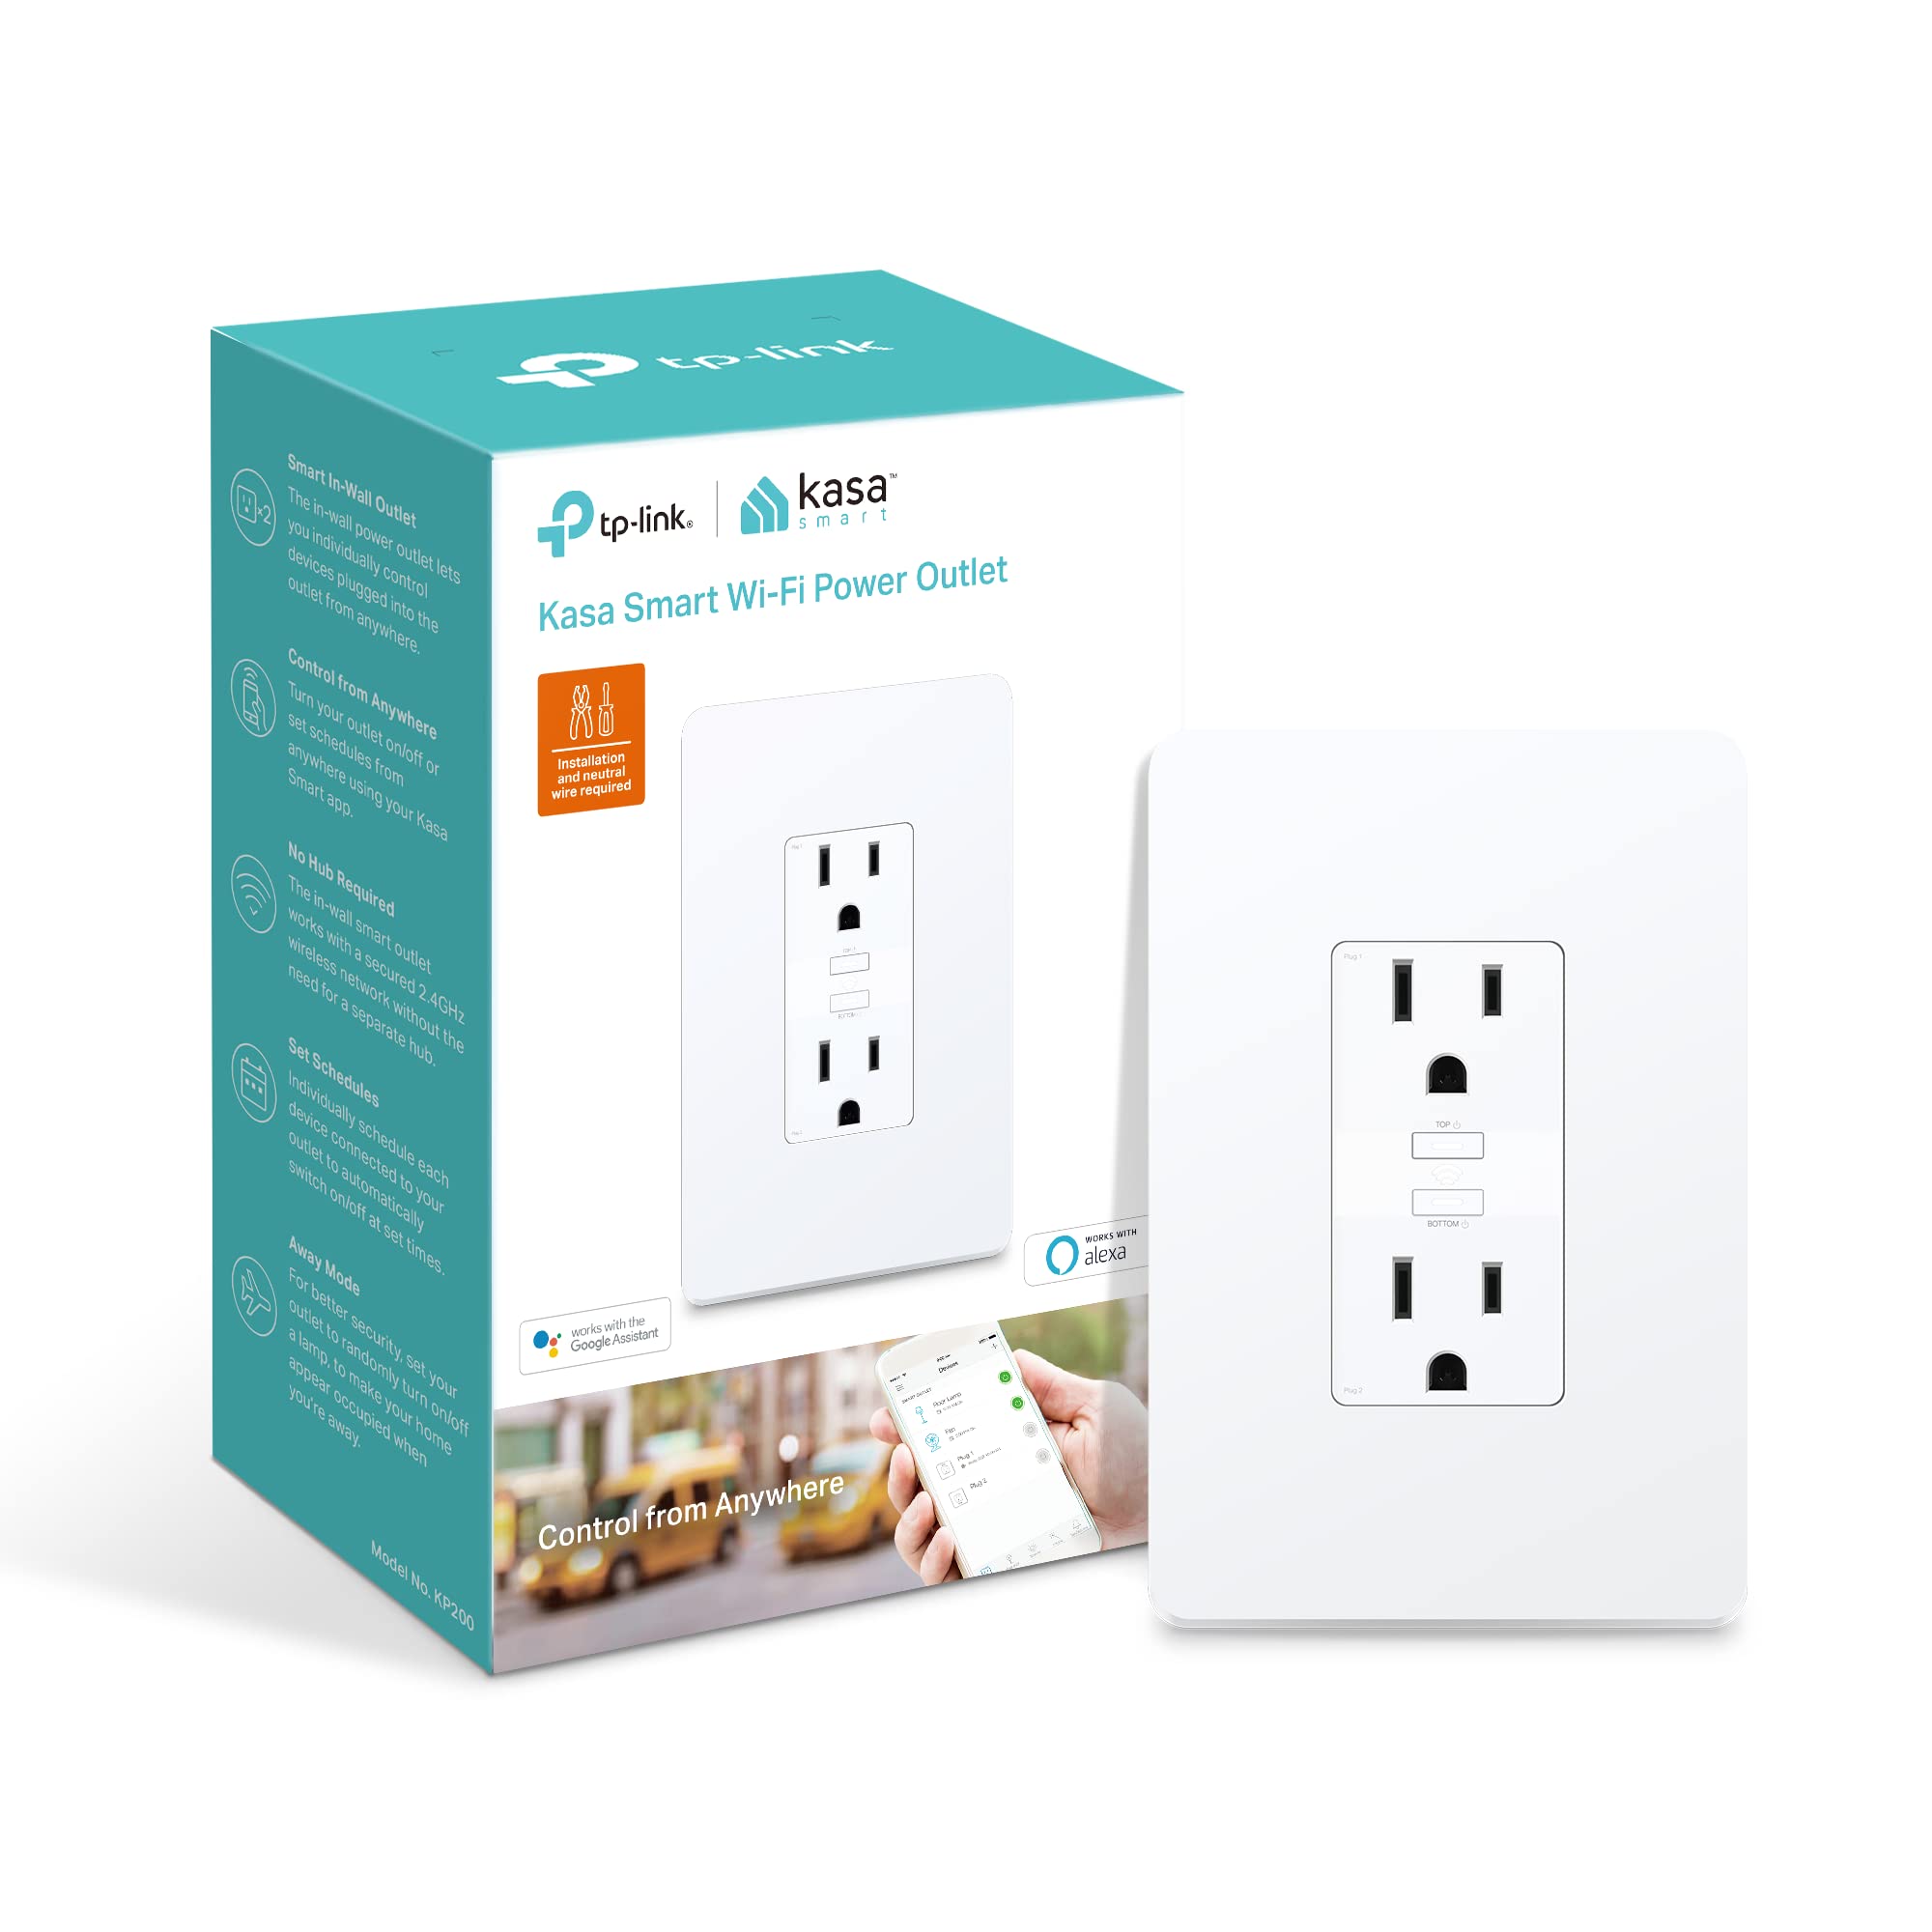 TP-Link Kasa Smart Plug KP200 In-Wall Wi-Fi Power Outlet